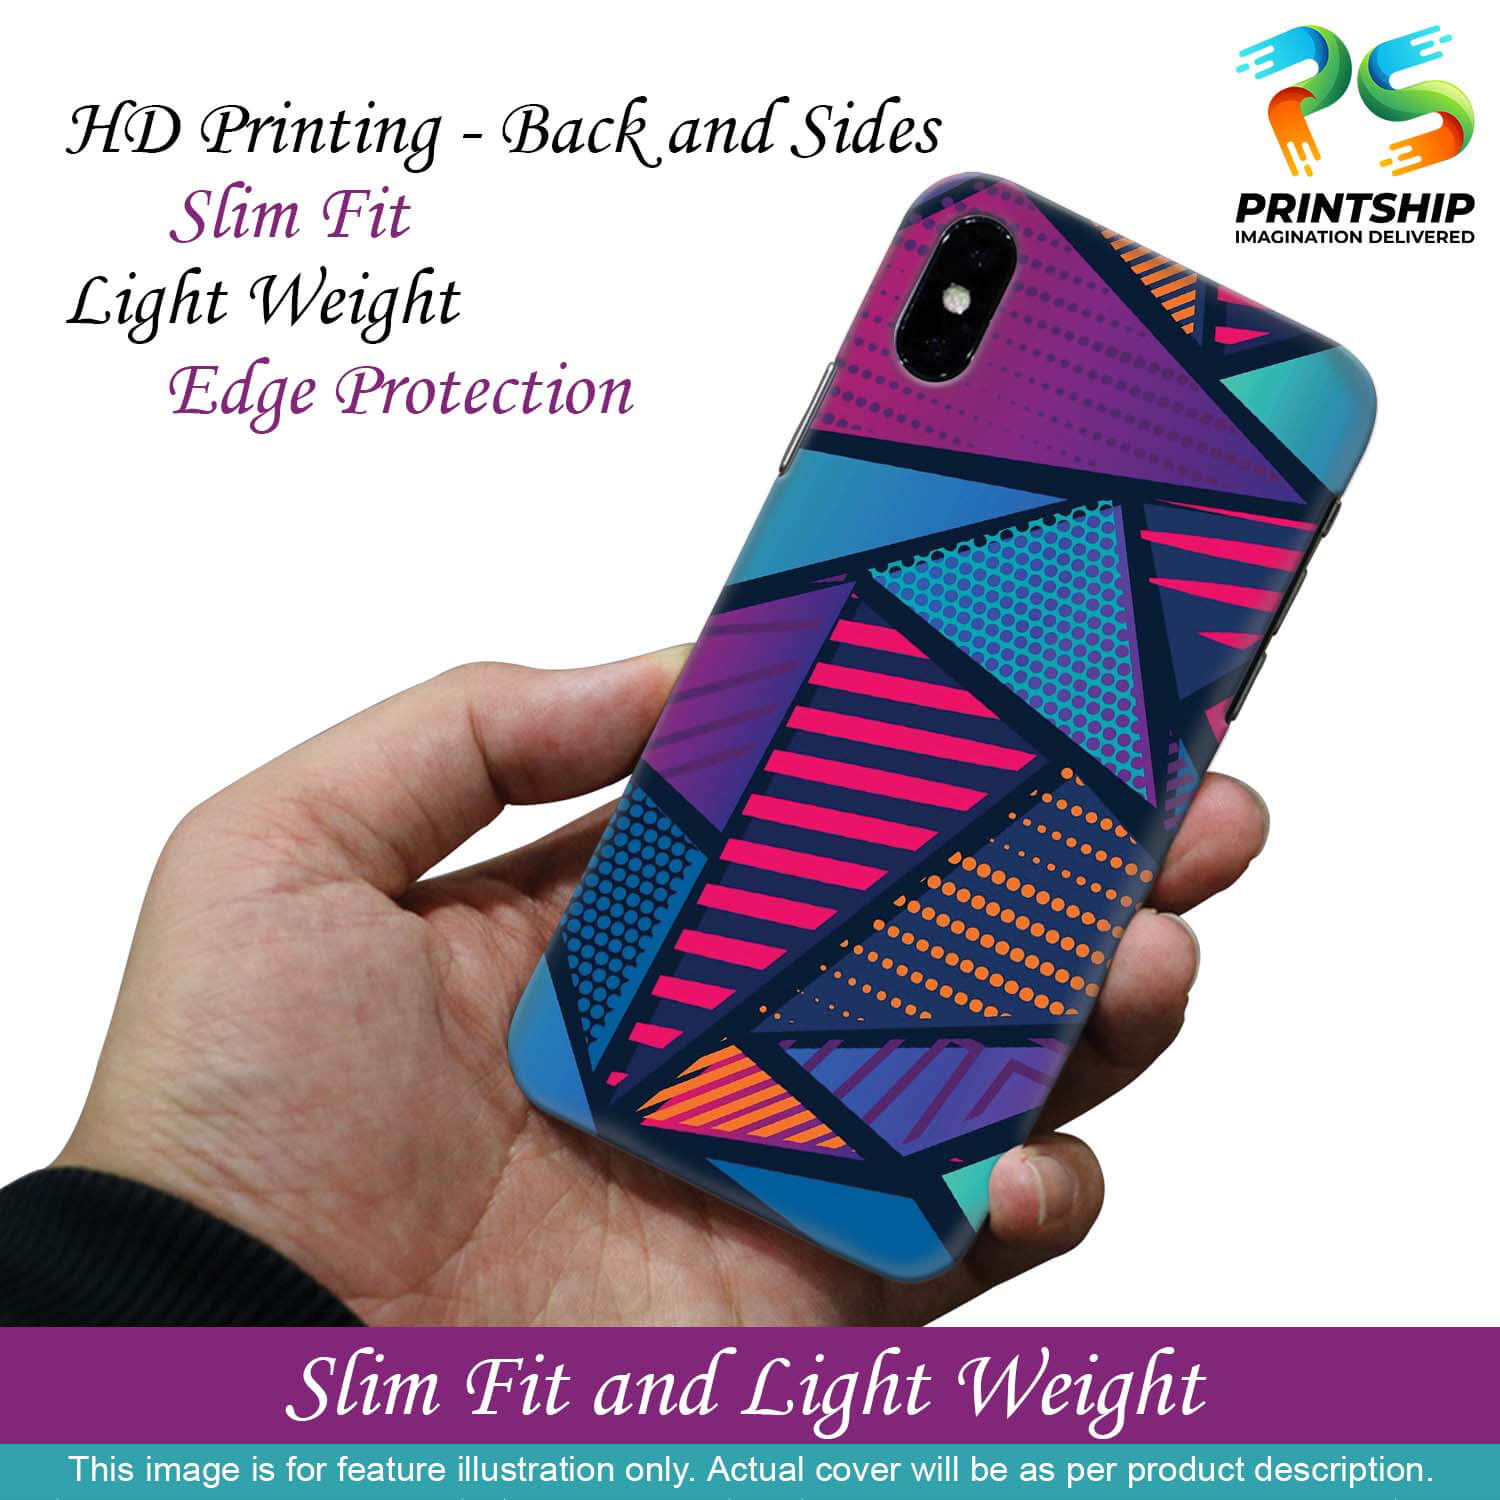 PS1335-Geometric Pattern Back Cover for Xiaomi Mi A3